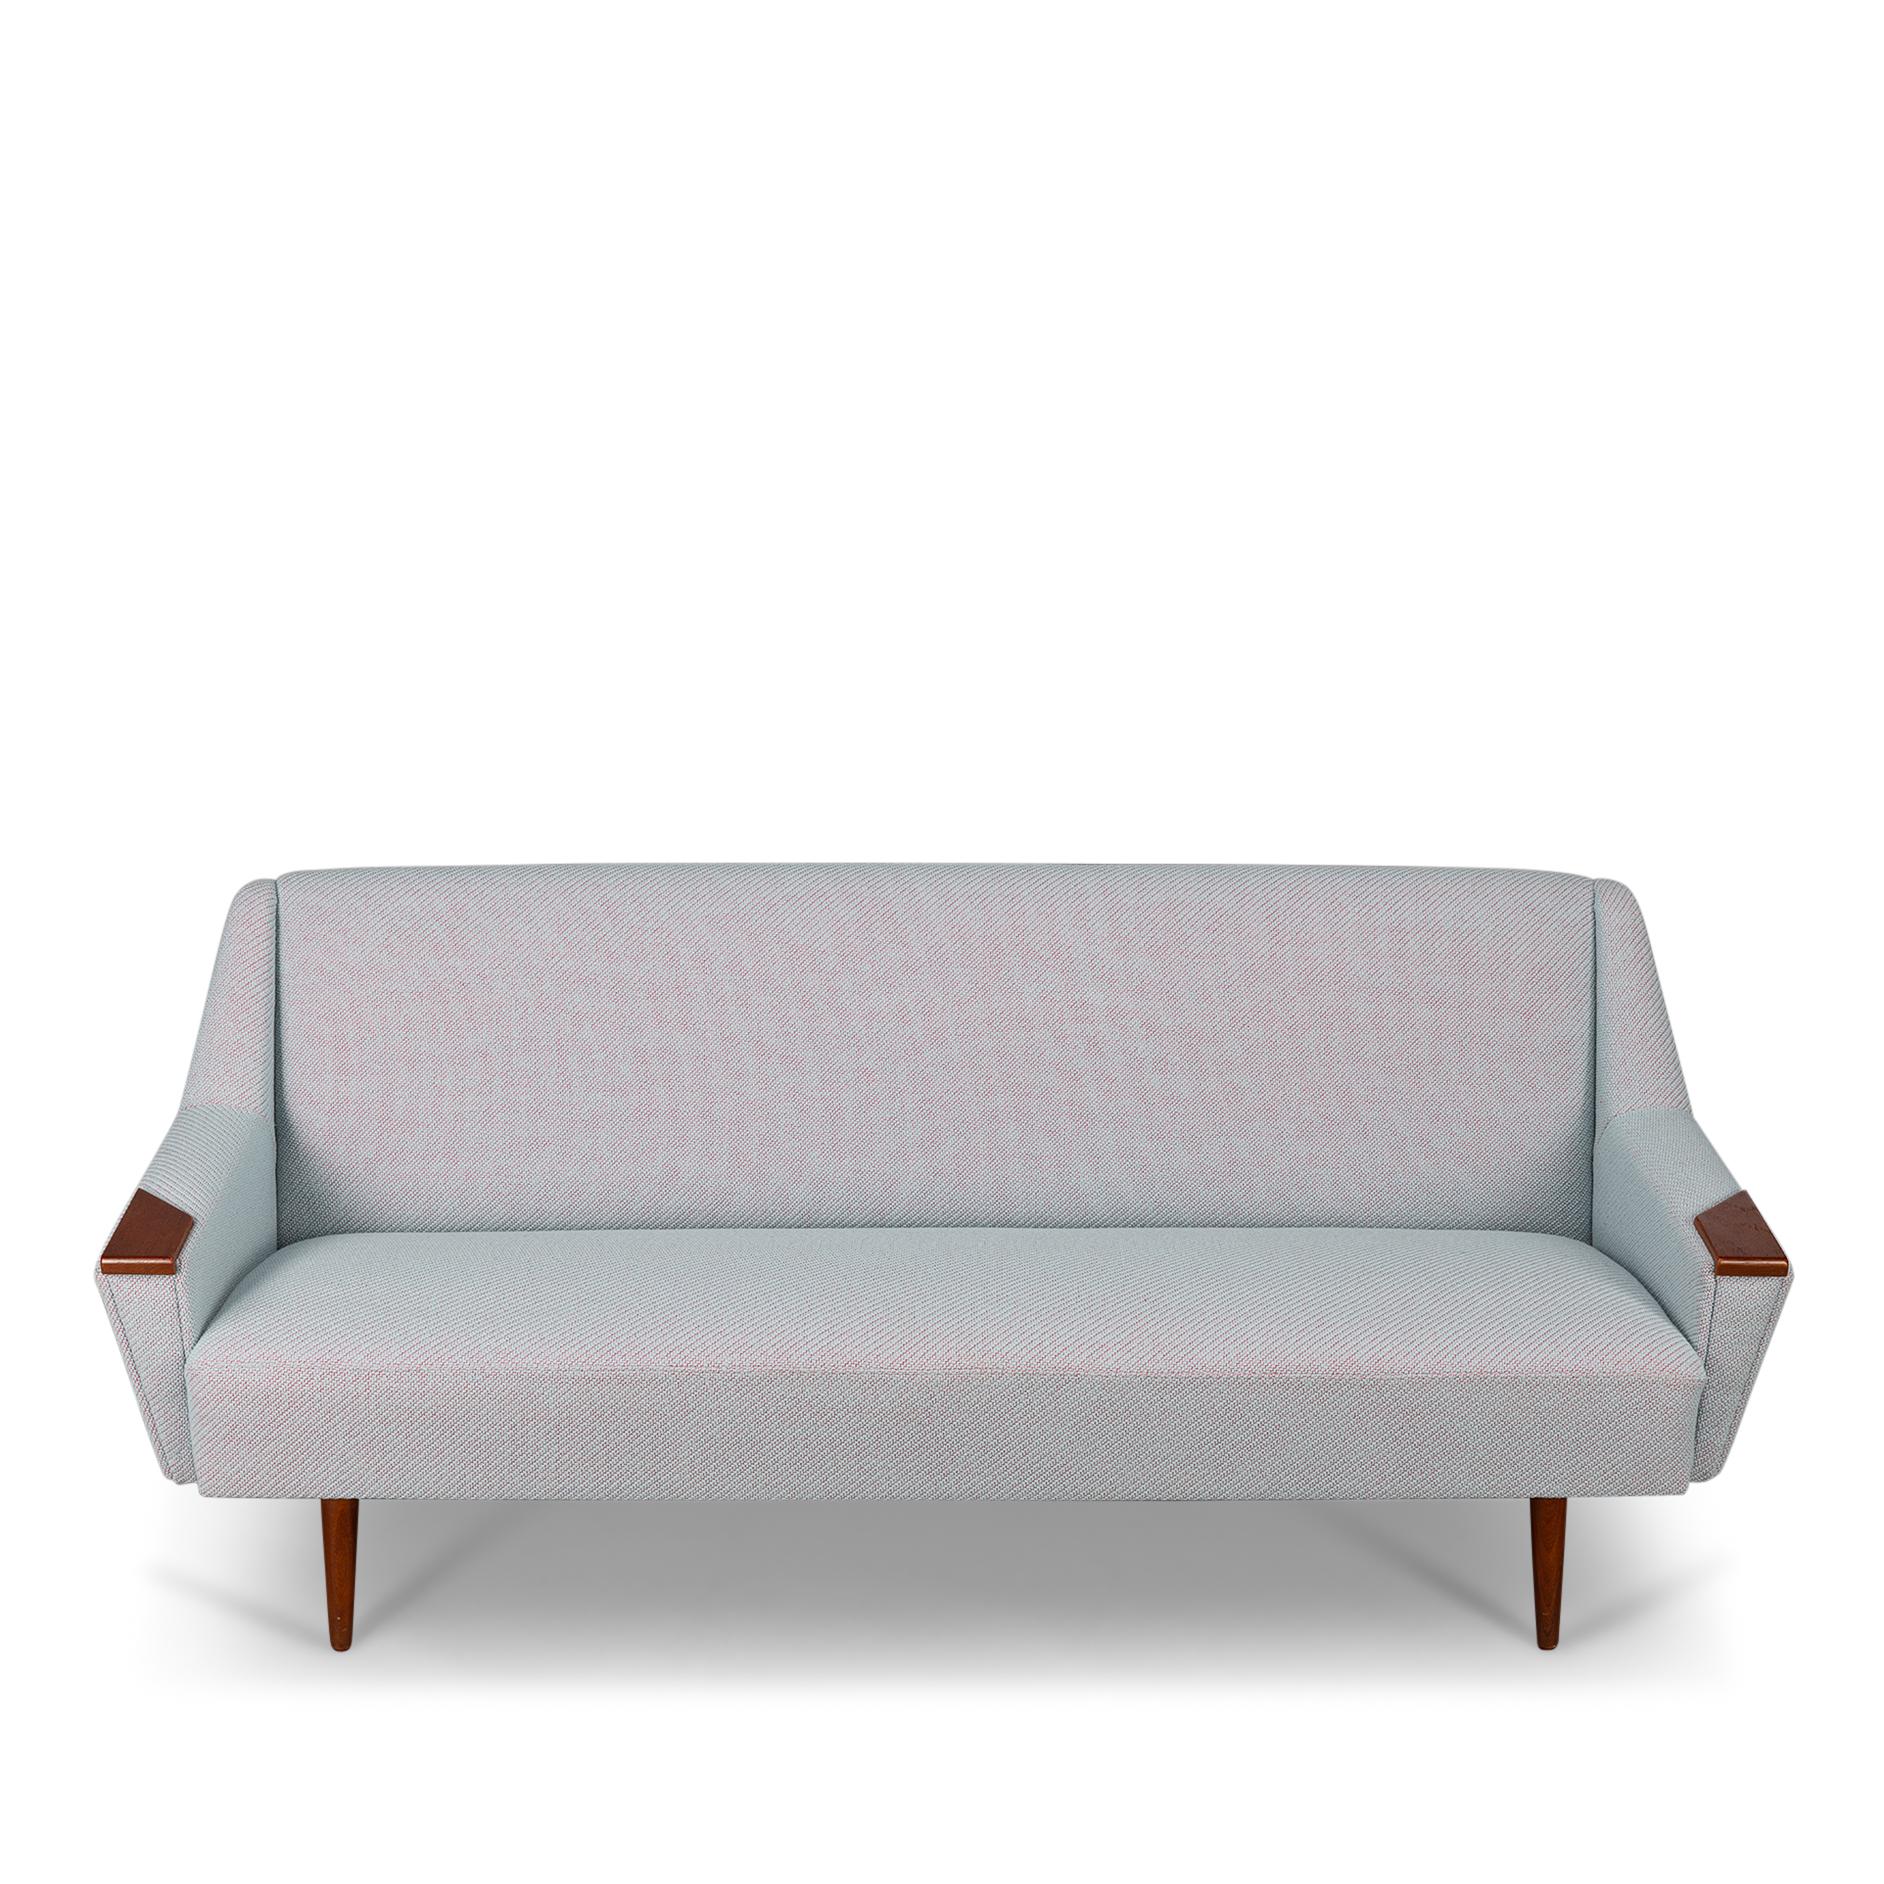 Mid-Century Modern Reupholstered light blue Danish Design Sofa made by Dux , 1960s For Sale